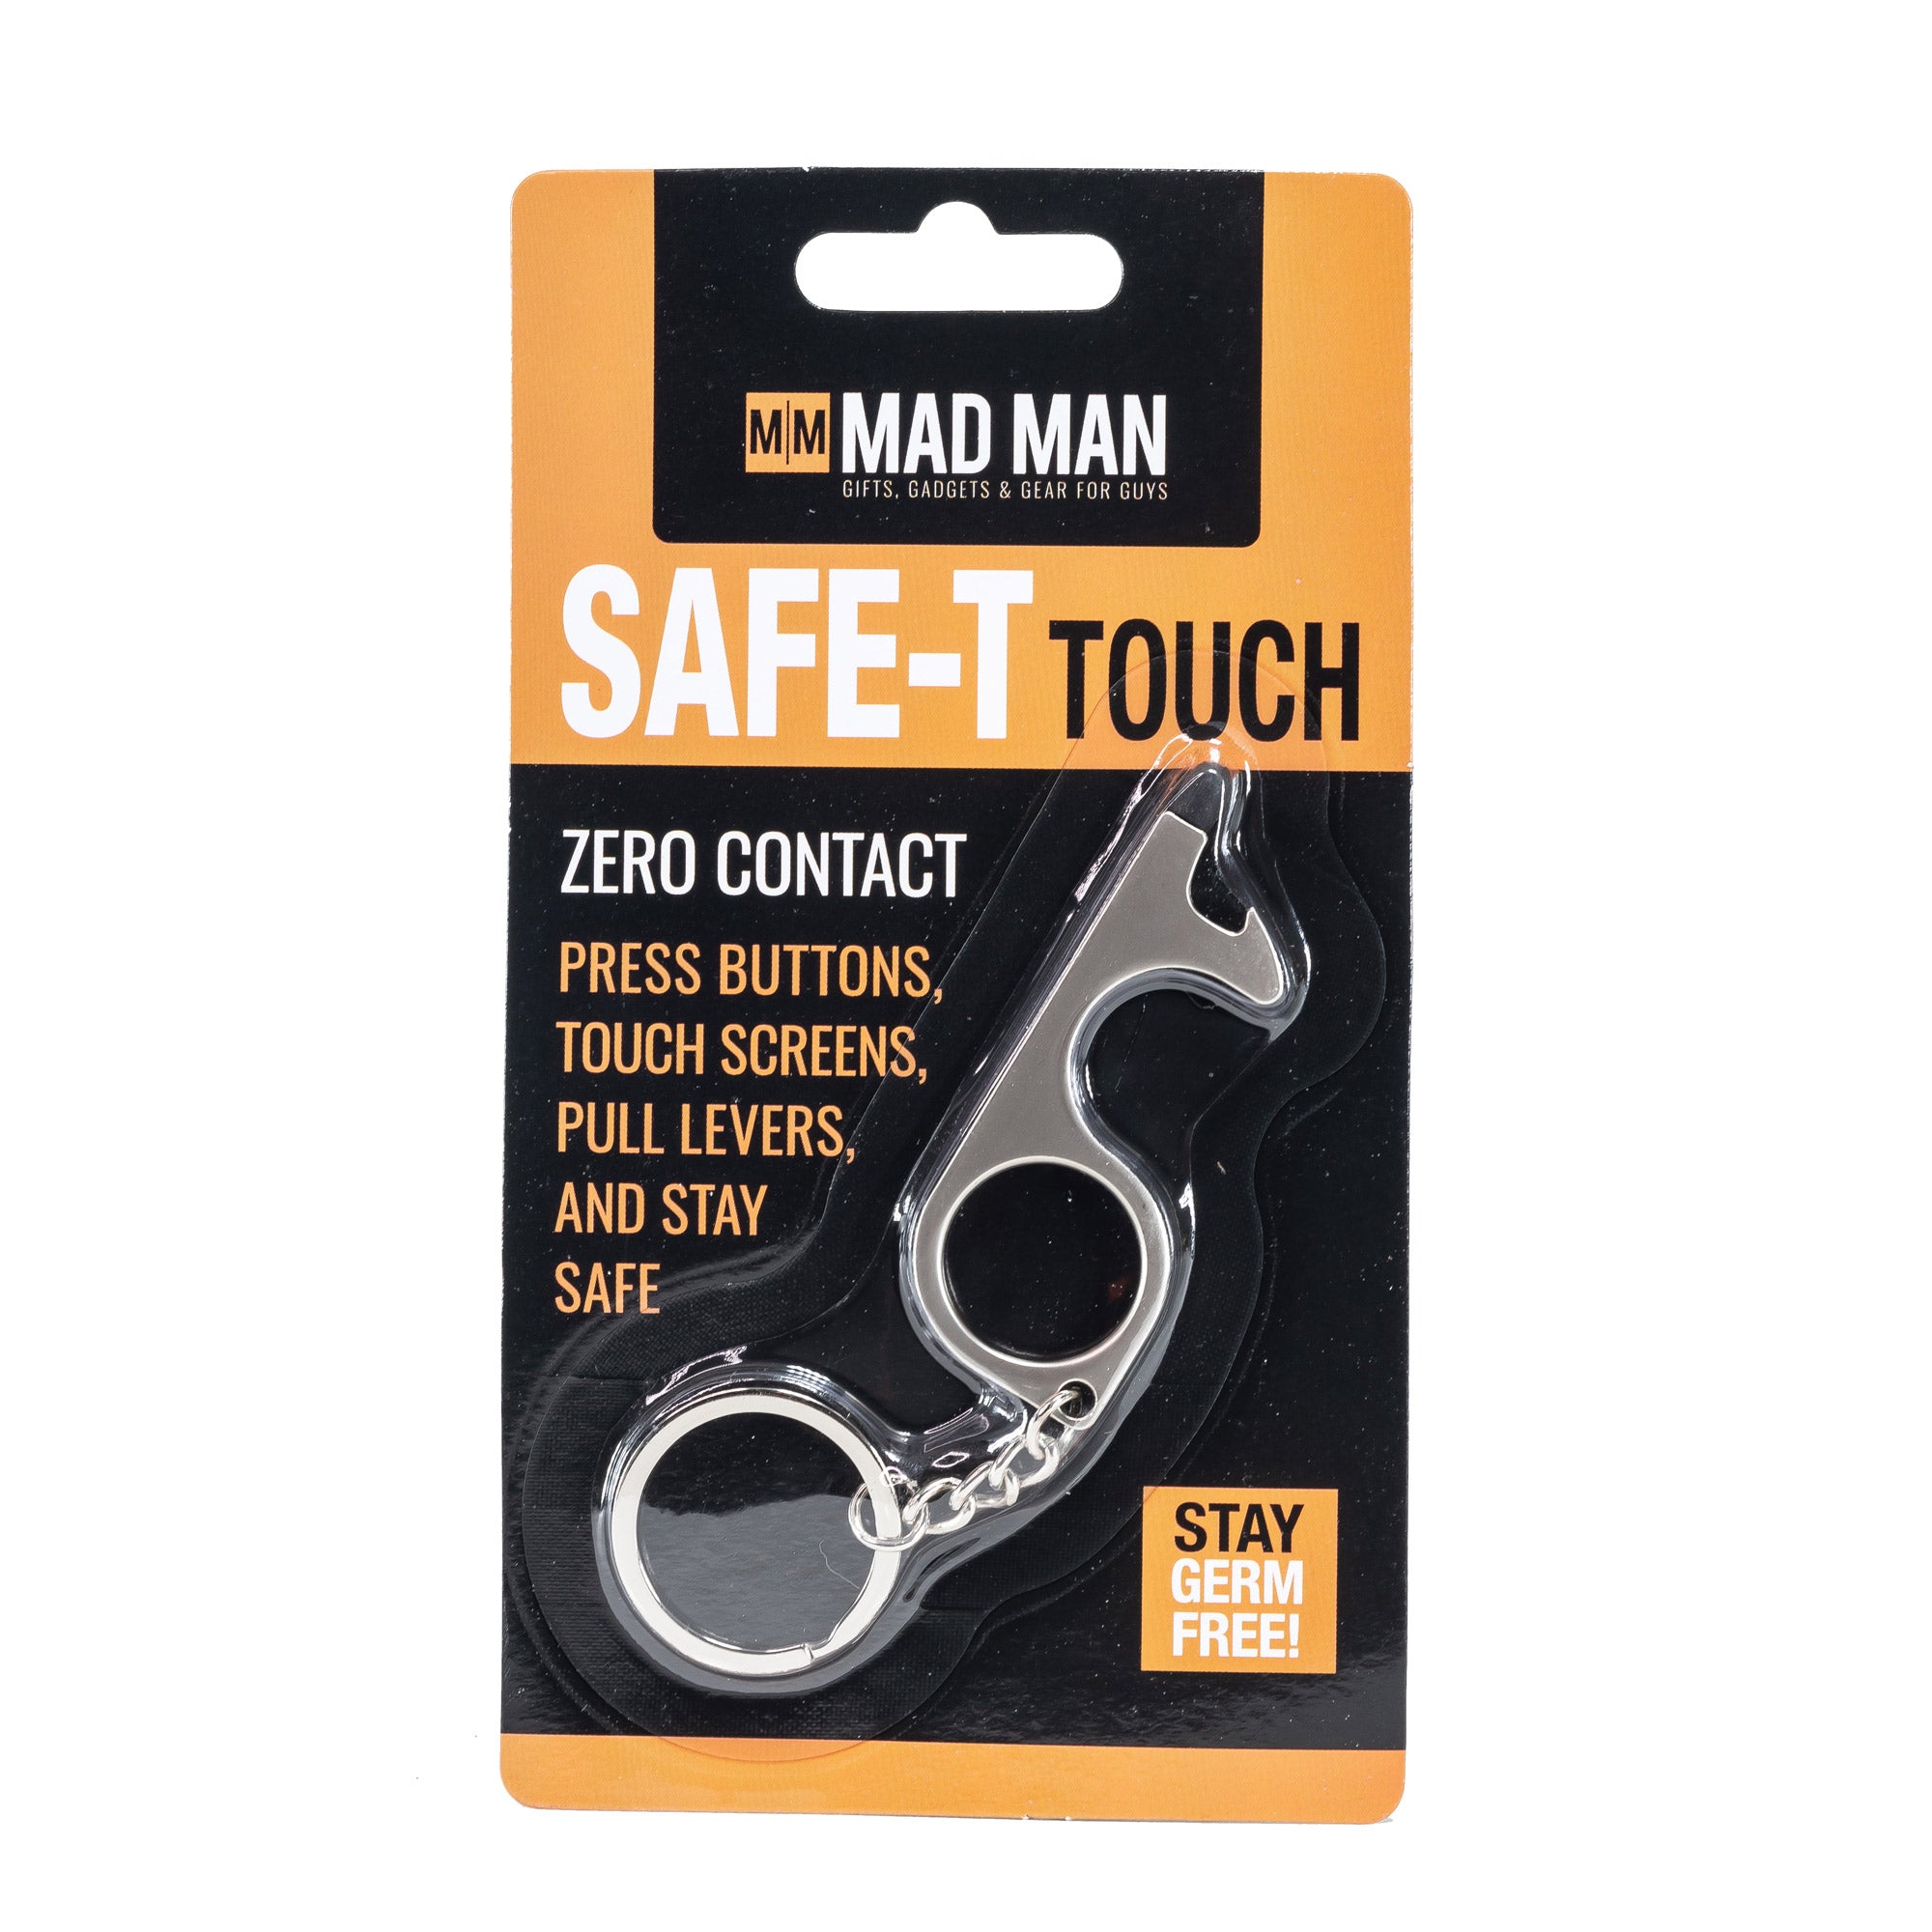 Safe-T Touch